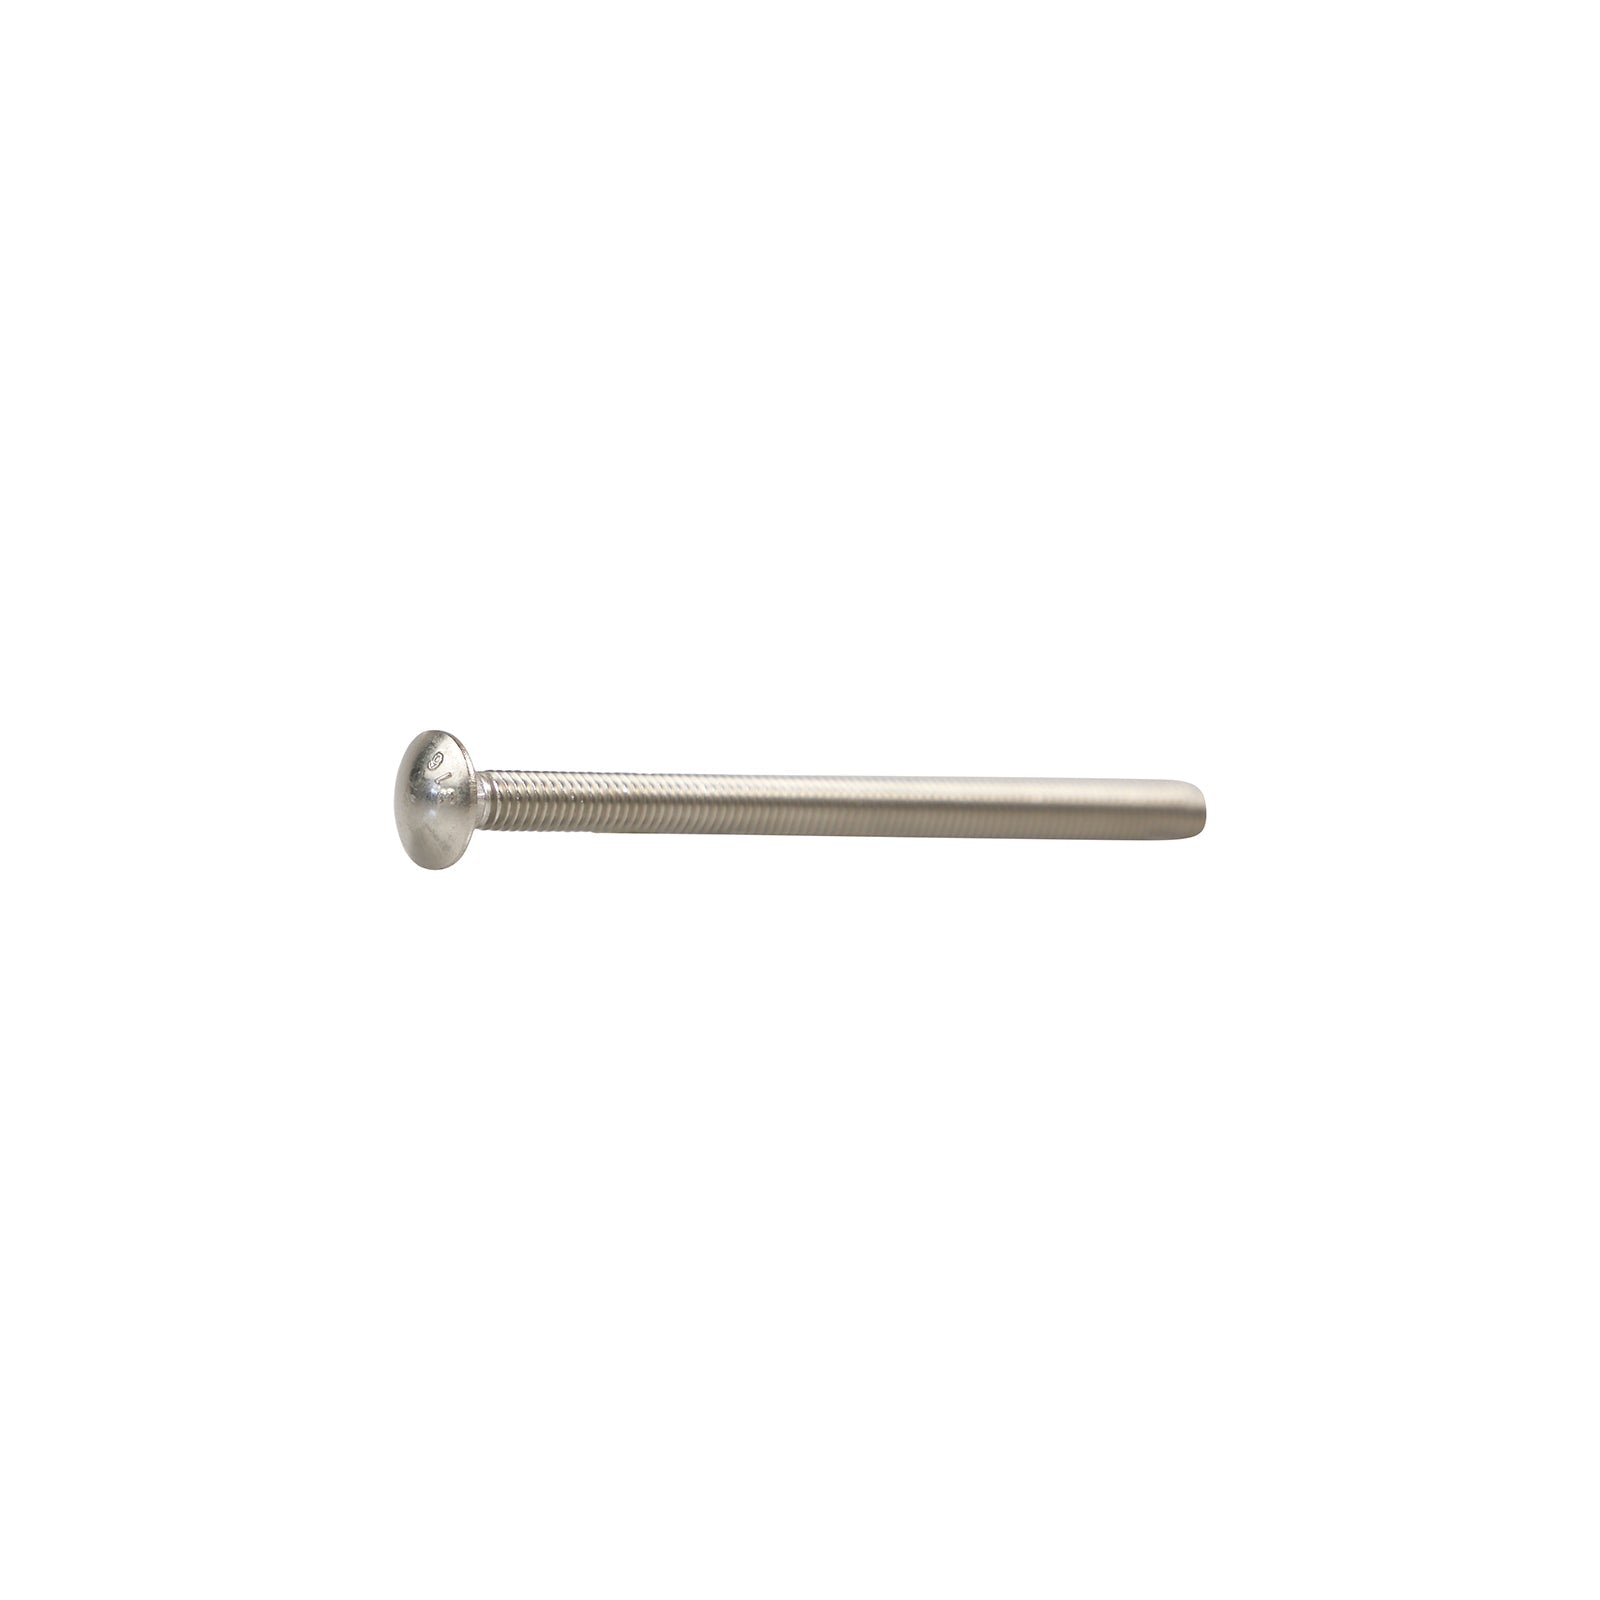 5/16"-18 x 5" Conquest Carriage Bolt - 316 Stainless Steel